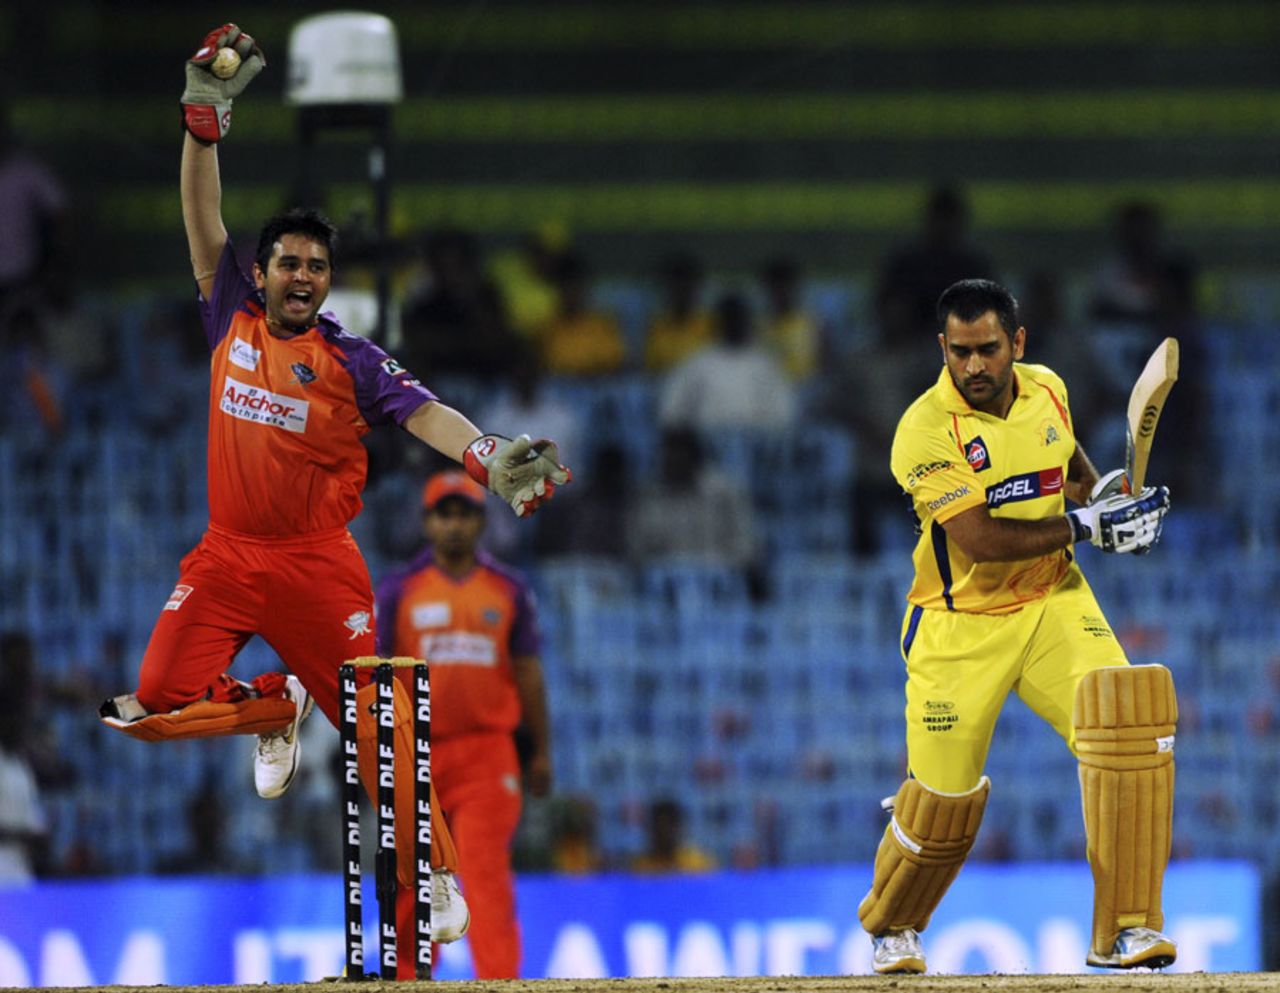 MS Dhoni is about to walk even as Parthiv Patel goes up in appeal for a catch behind, Chennai Super Kings v Kochi Tuskers Kerala, IPL 2011, Chennai, May 18, 2011